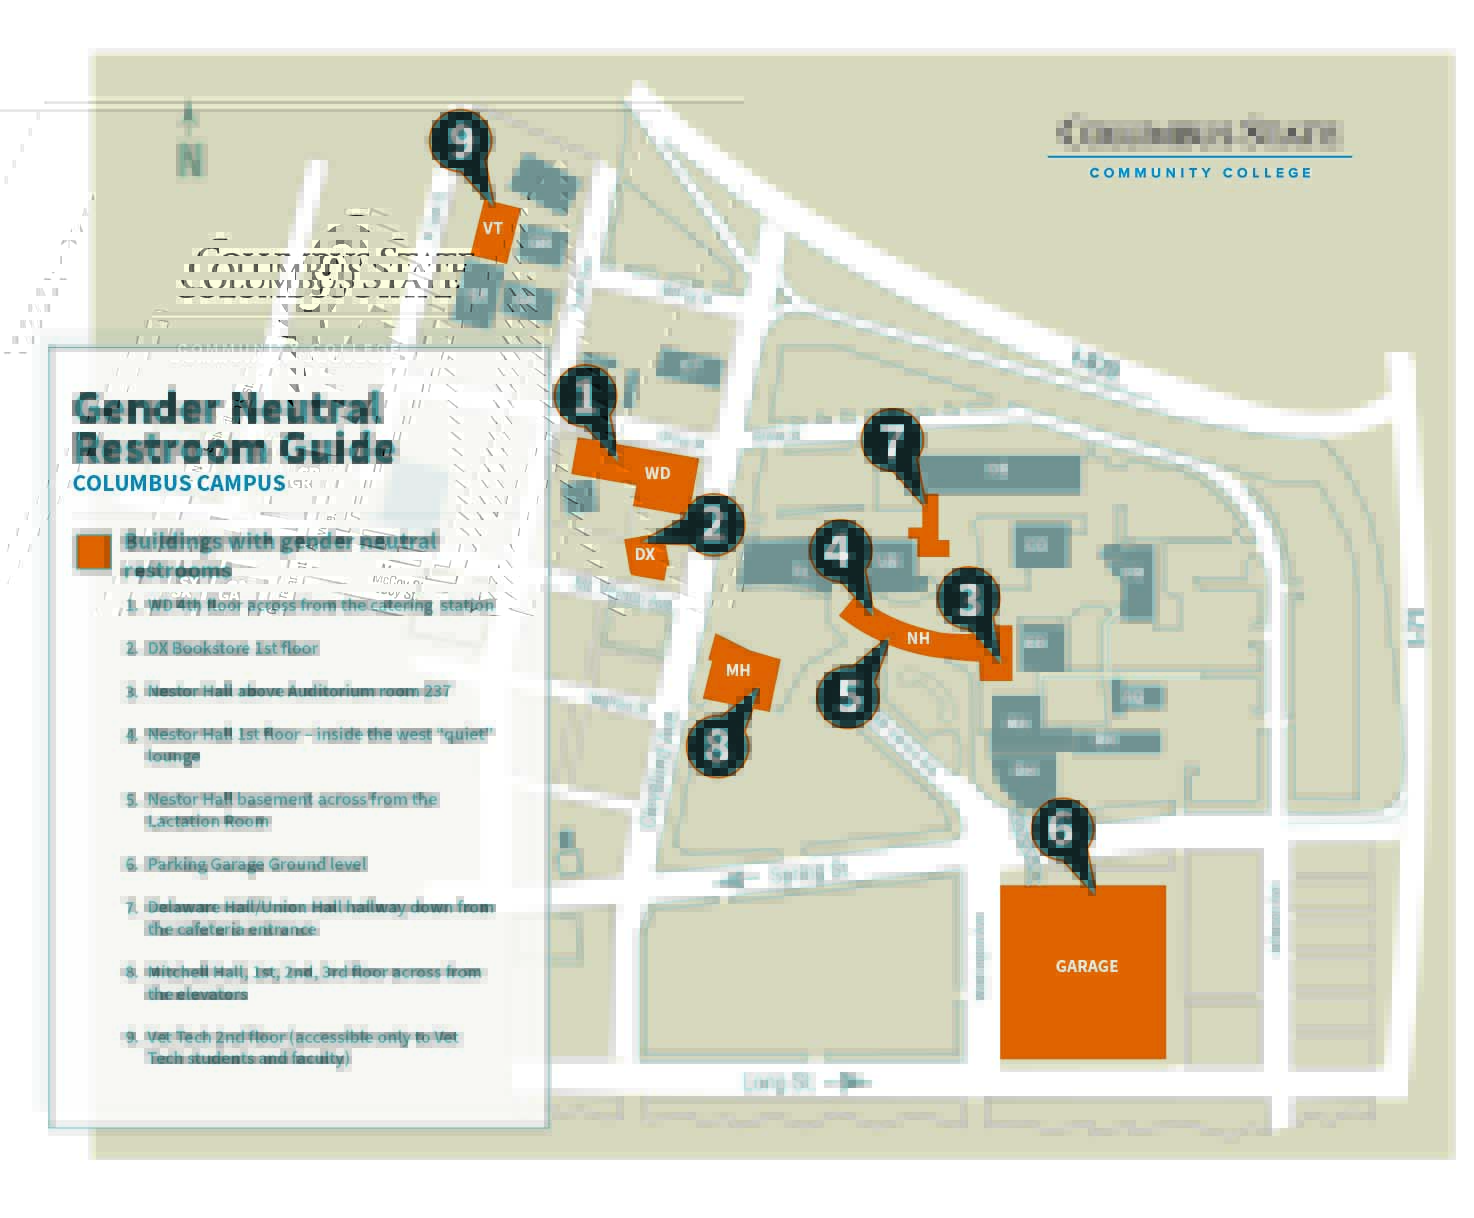 Map featuring buildings with gender neutral restrooms at Columbus campus